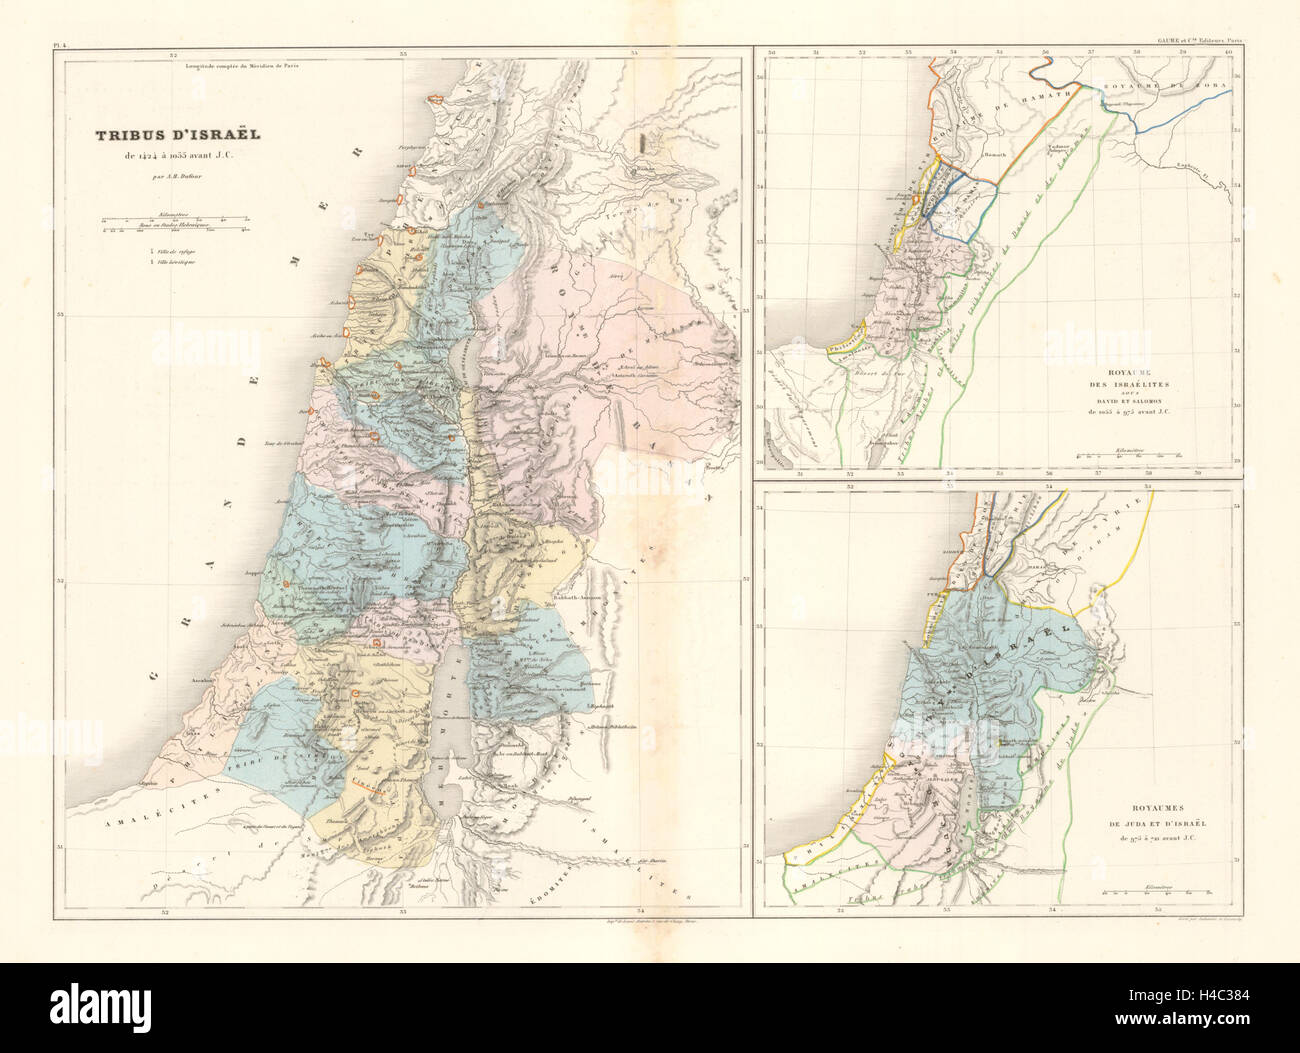 Tribus D'Israel/Royaume des Israelites &c. DUFOUR. 12 Tribes of Israel c1840 map Stock Photo